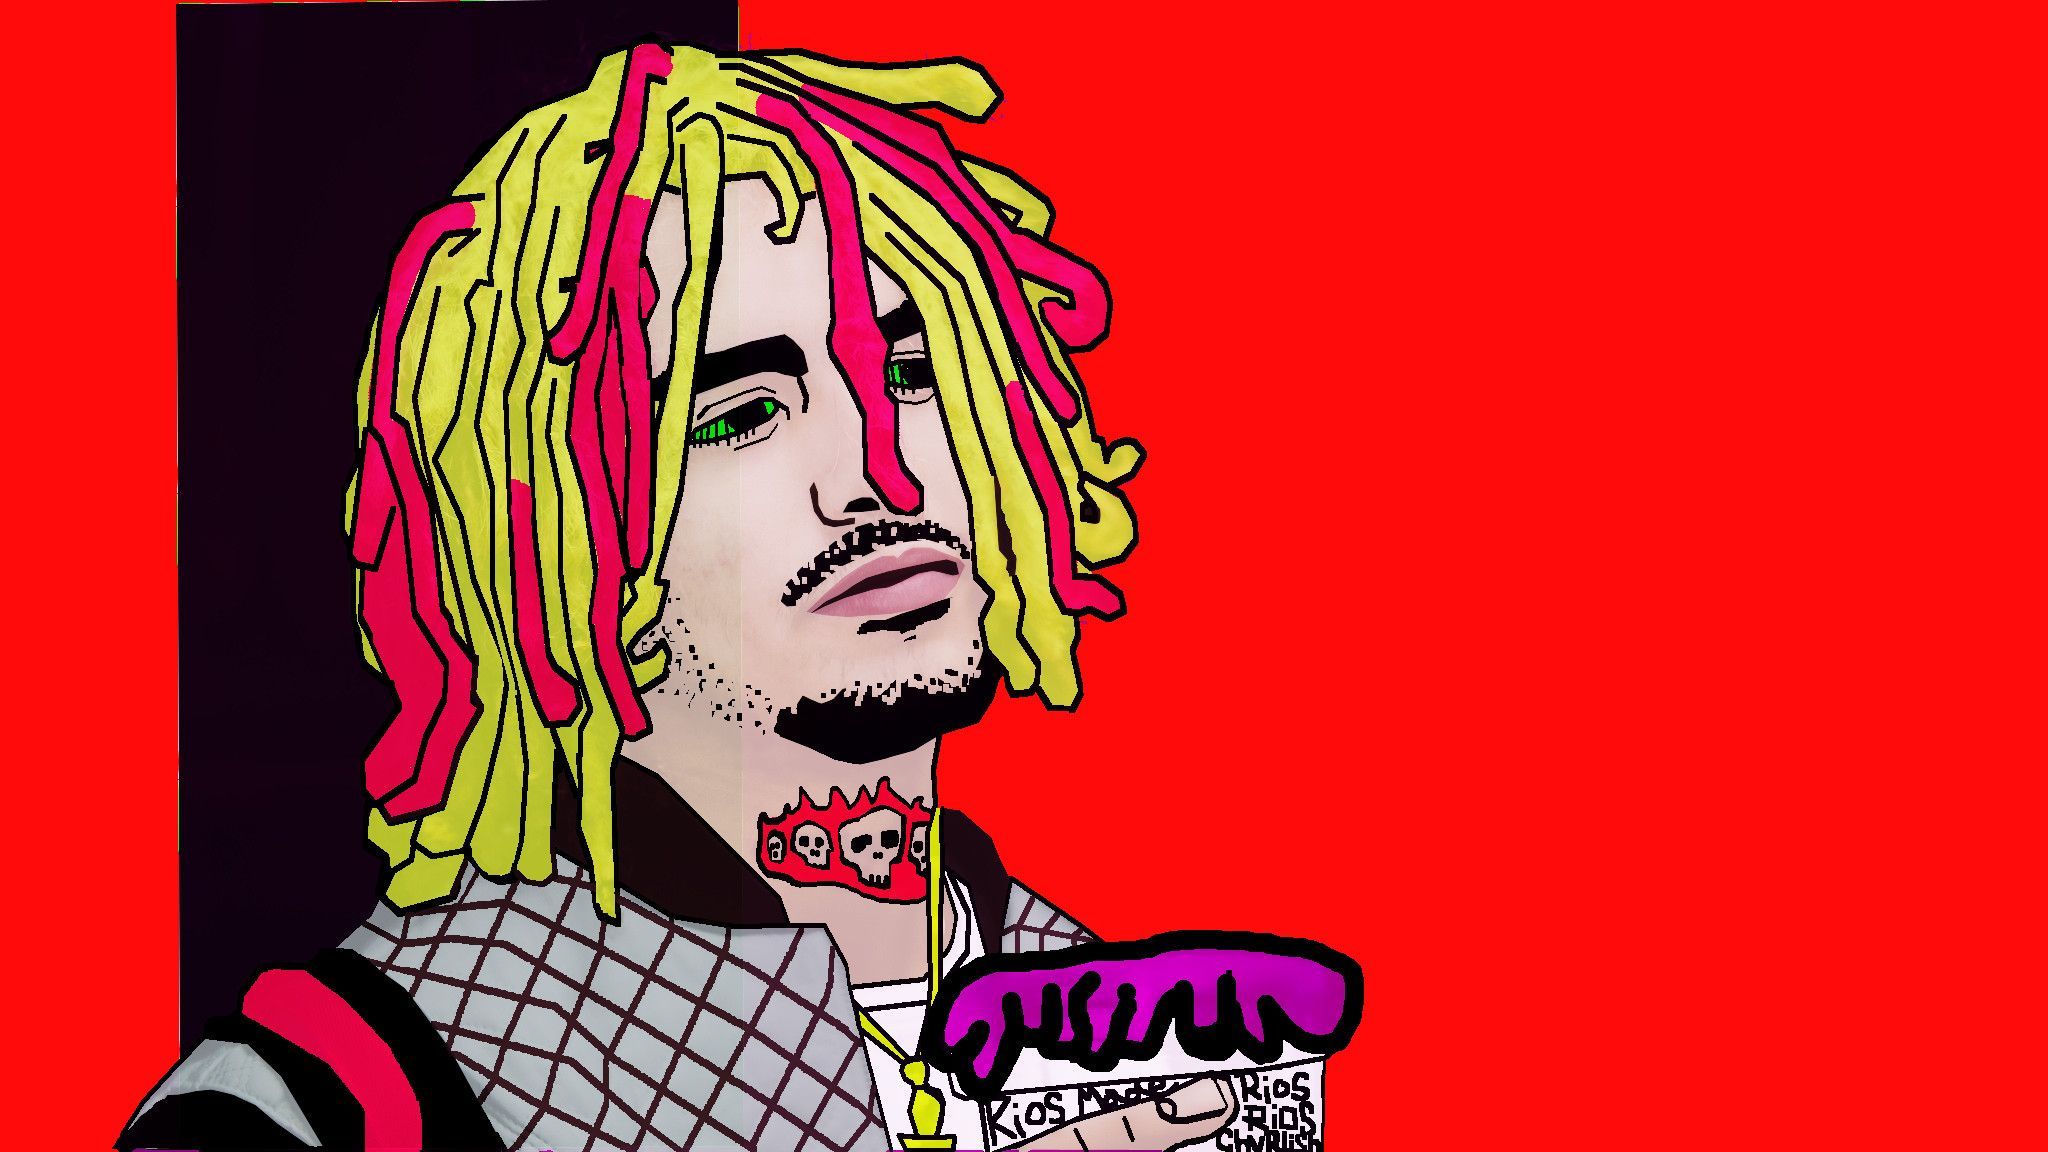 Lil Pump Nike wallpaper by Therealjona - Download on ZEDGE™ | 3916